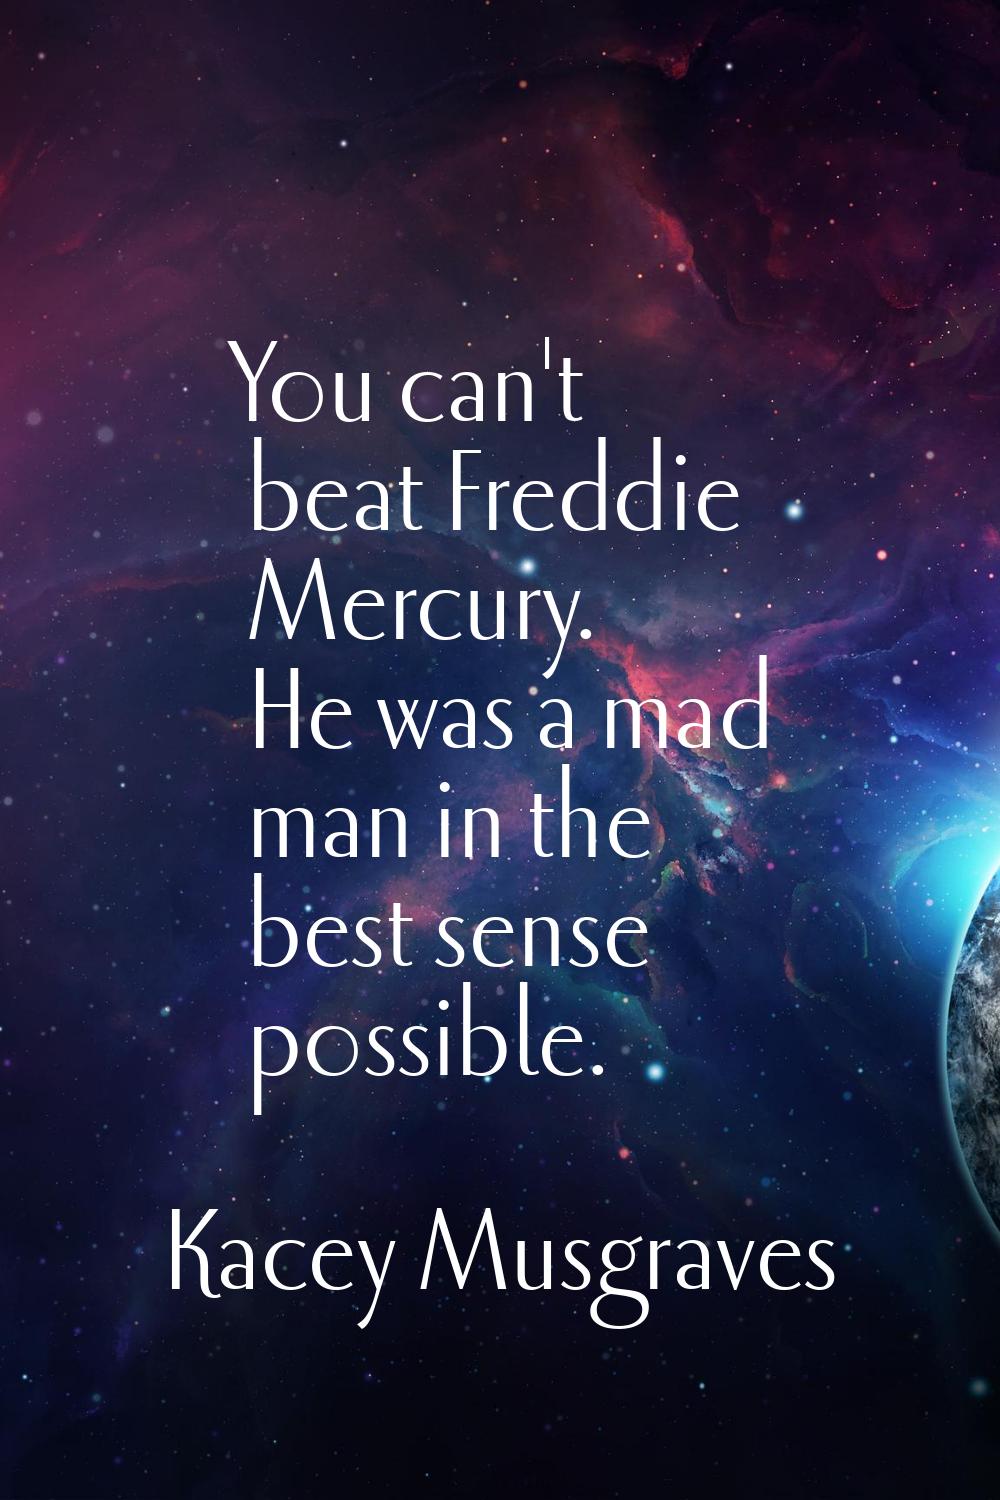 You can't beat Freddie Mercury. He was a mad man in the best sense possible.